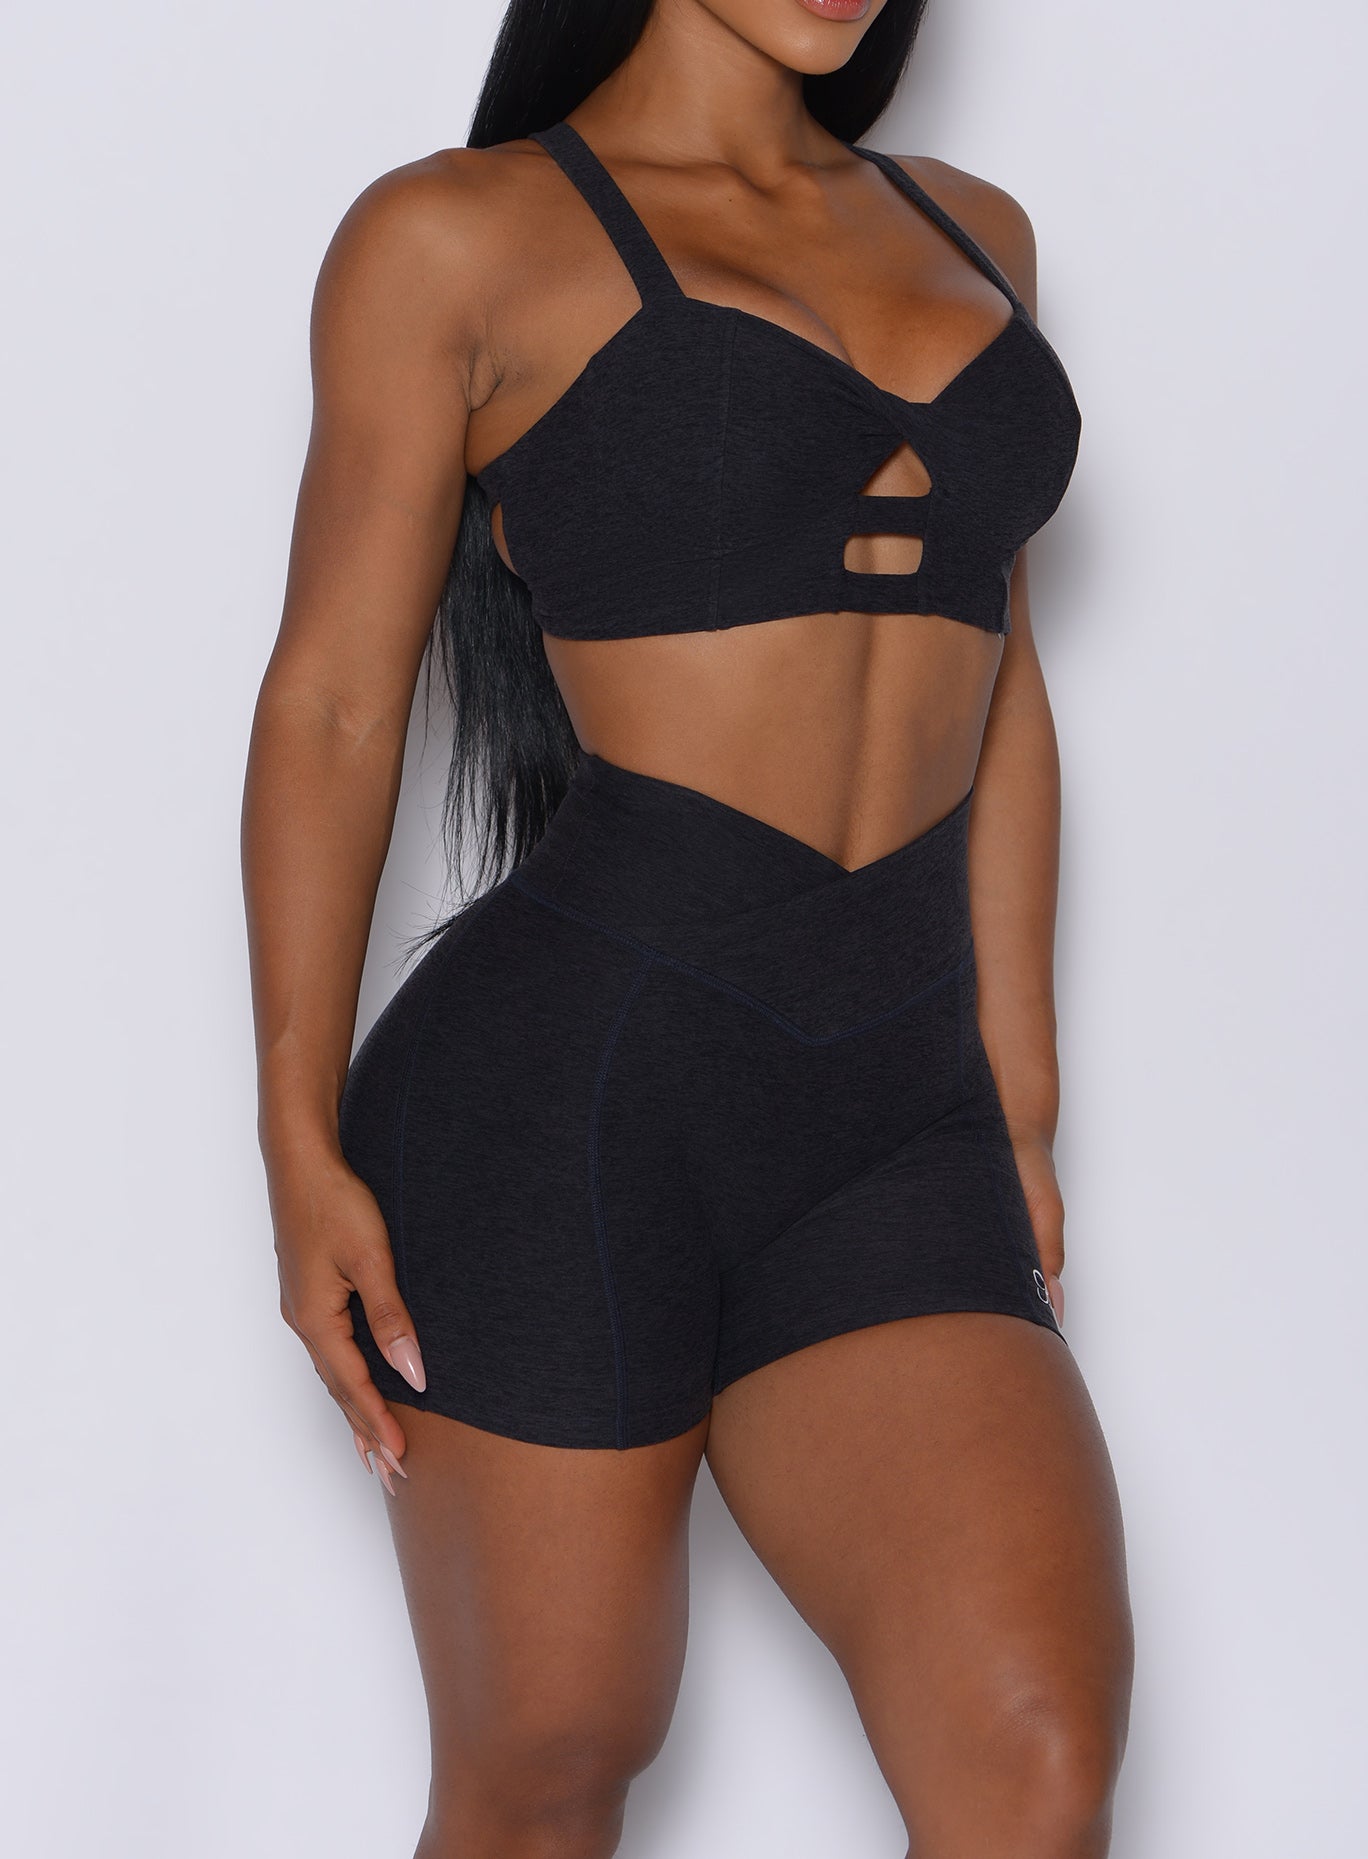 right side profile view of a model wearing our black Tiny Waist Shorts along with the matching bra